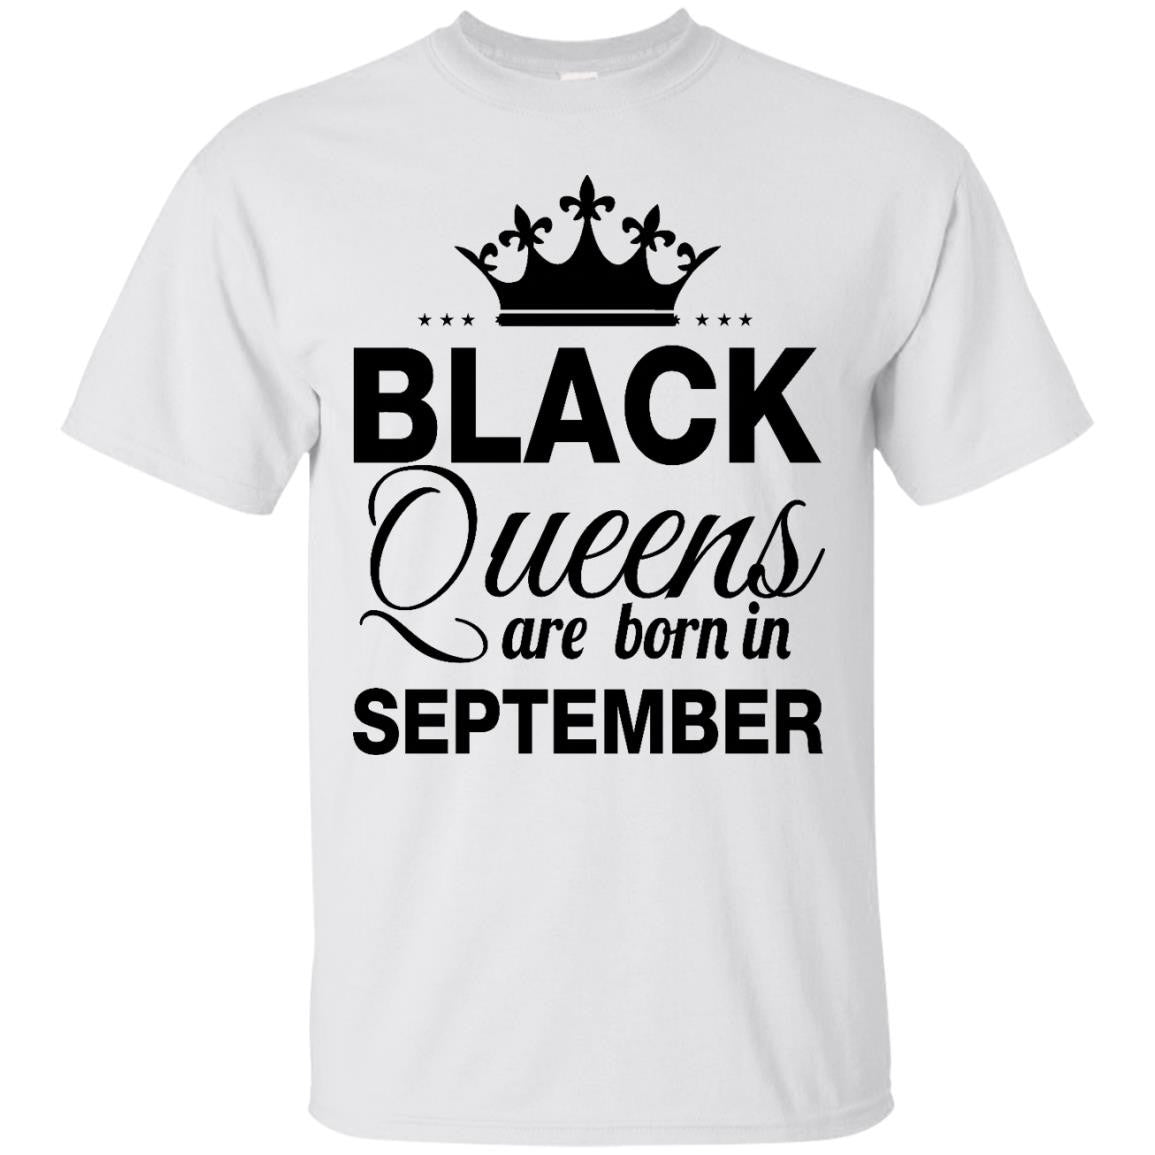 Black Queen are born in September shirt, tank top, hoodie